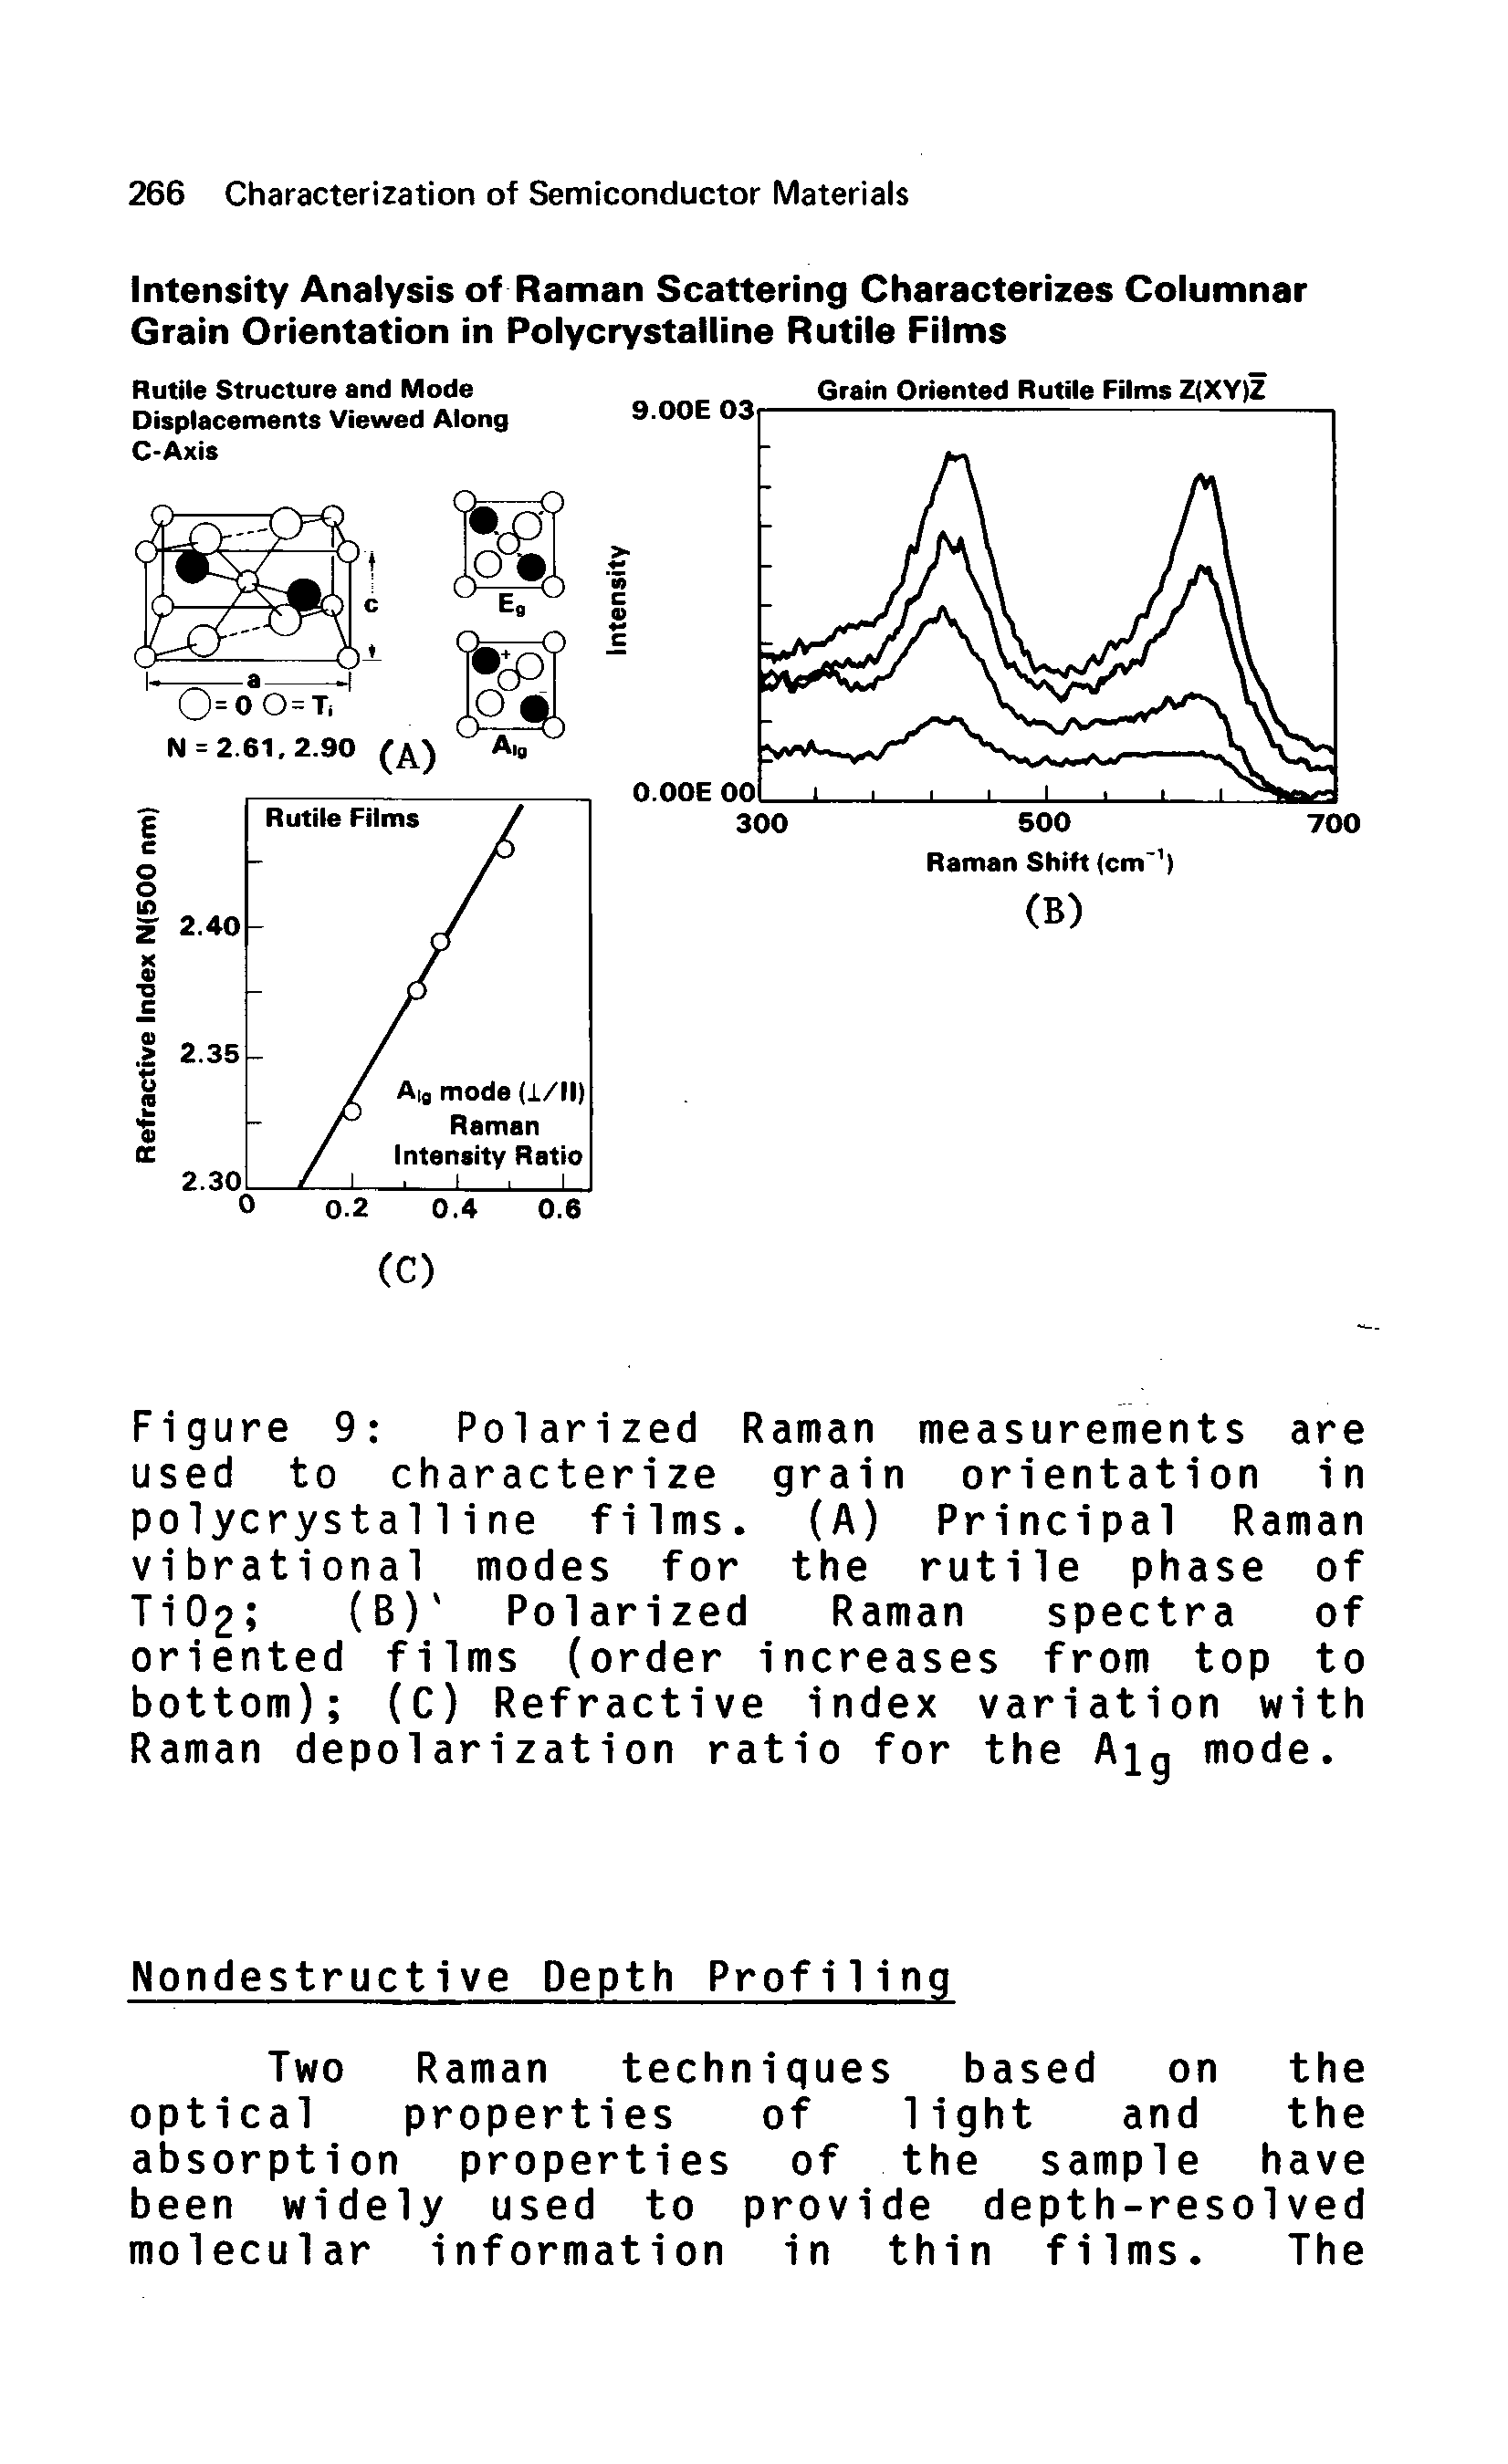 Figure 9 Polarized Raman measurements are used to characterize grain orientation in polycrystalline films. (A) Principal Raman vibrational modes for the rutile phase of Ti02 (B) Polarized Raman spectra of oriented films (order increases from top to bottom) (C) Refractive index variation with Raman depolarization ratio for the A q mode.